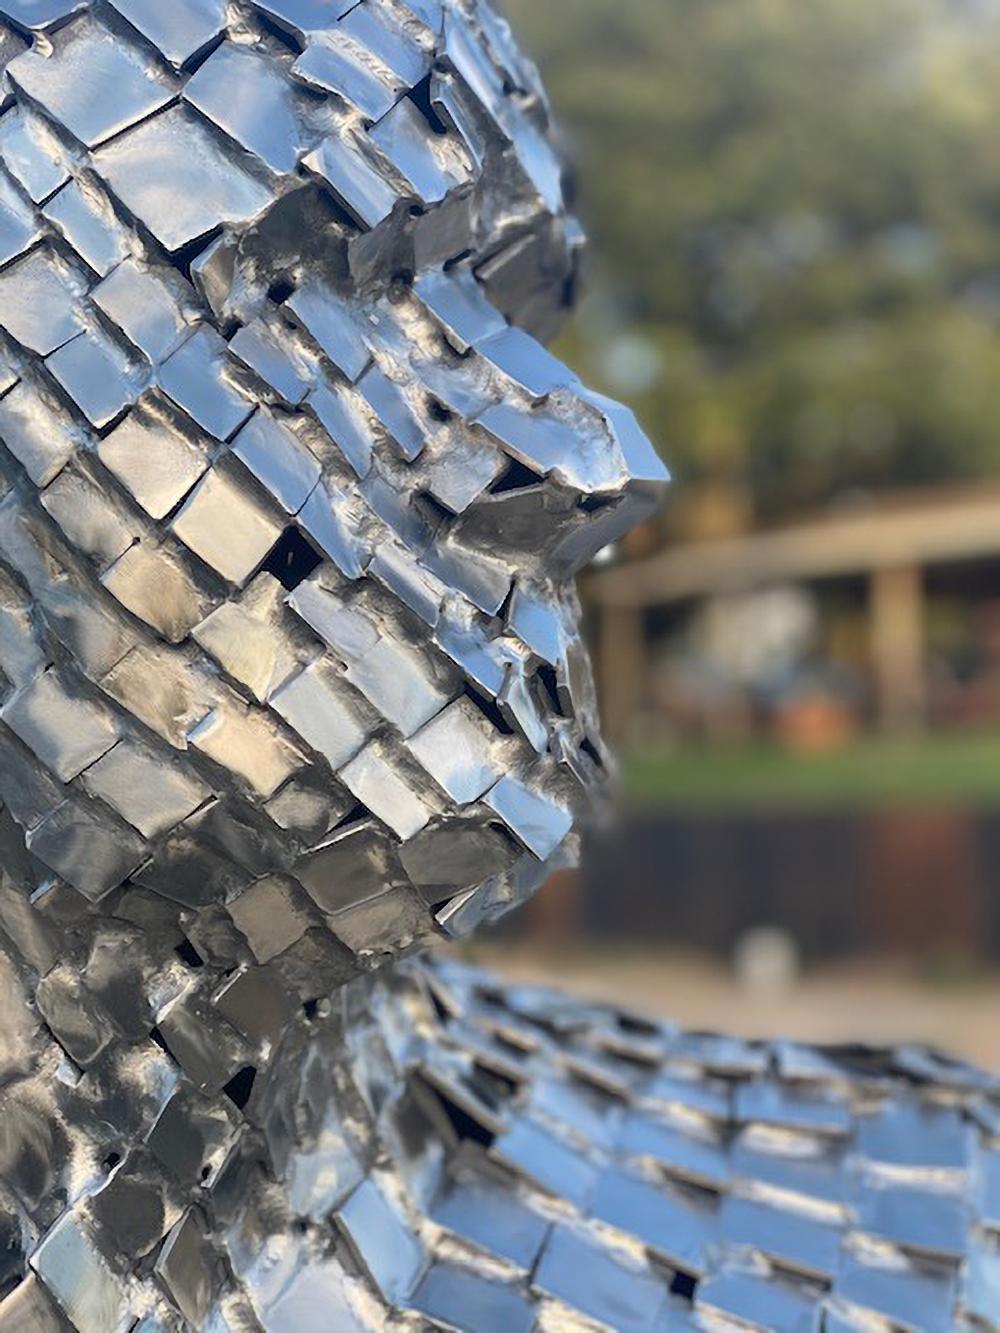 After Bathsheba - large, male nude figure, stainless steel outdoor sculpture - Contemporary Sculpture by Jason Kimes